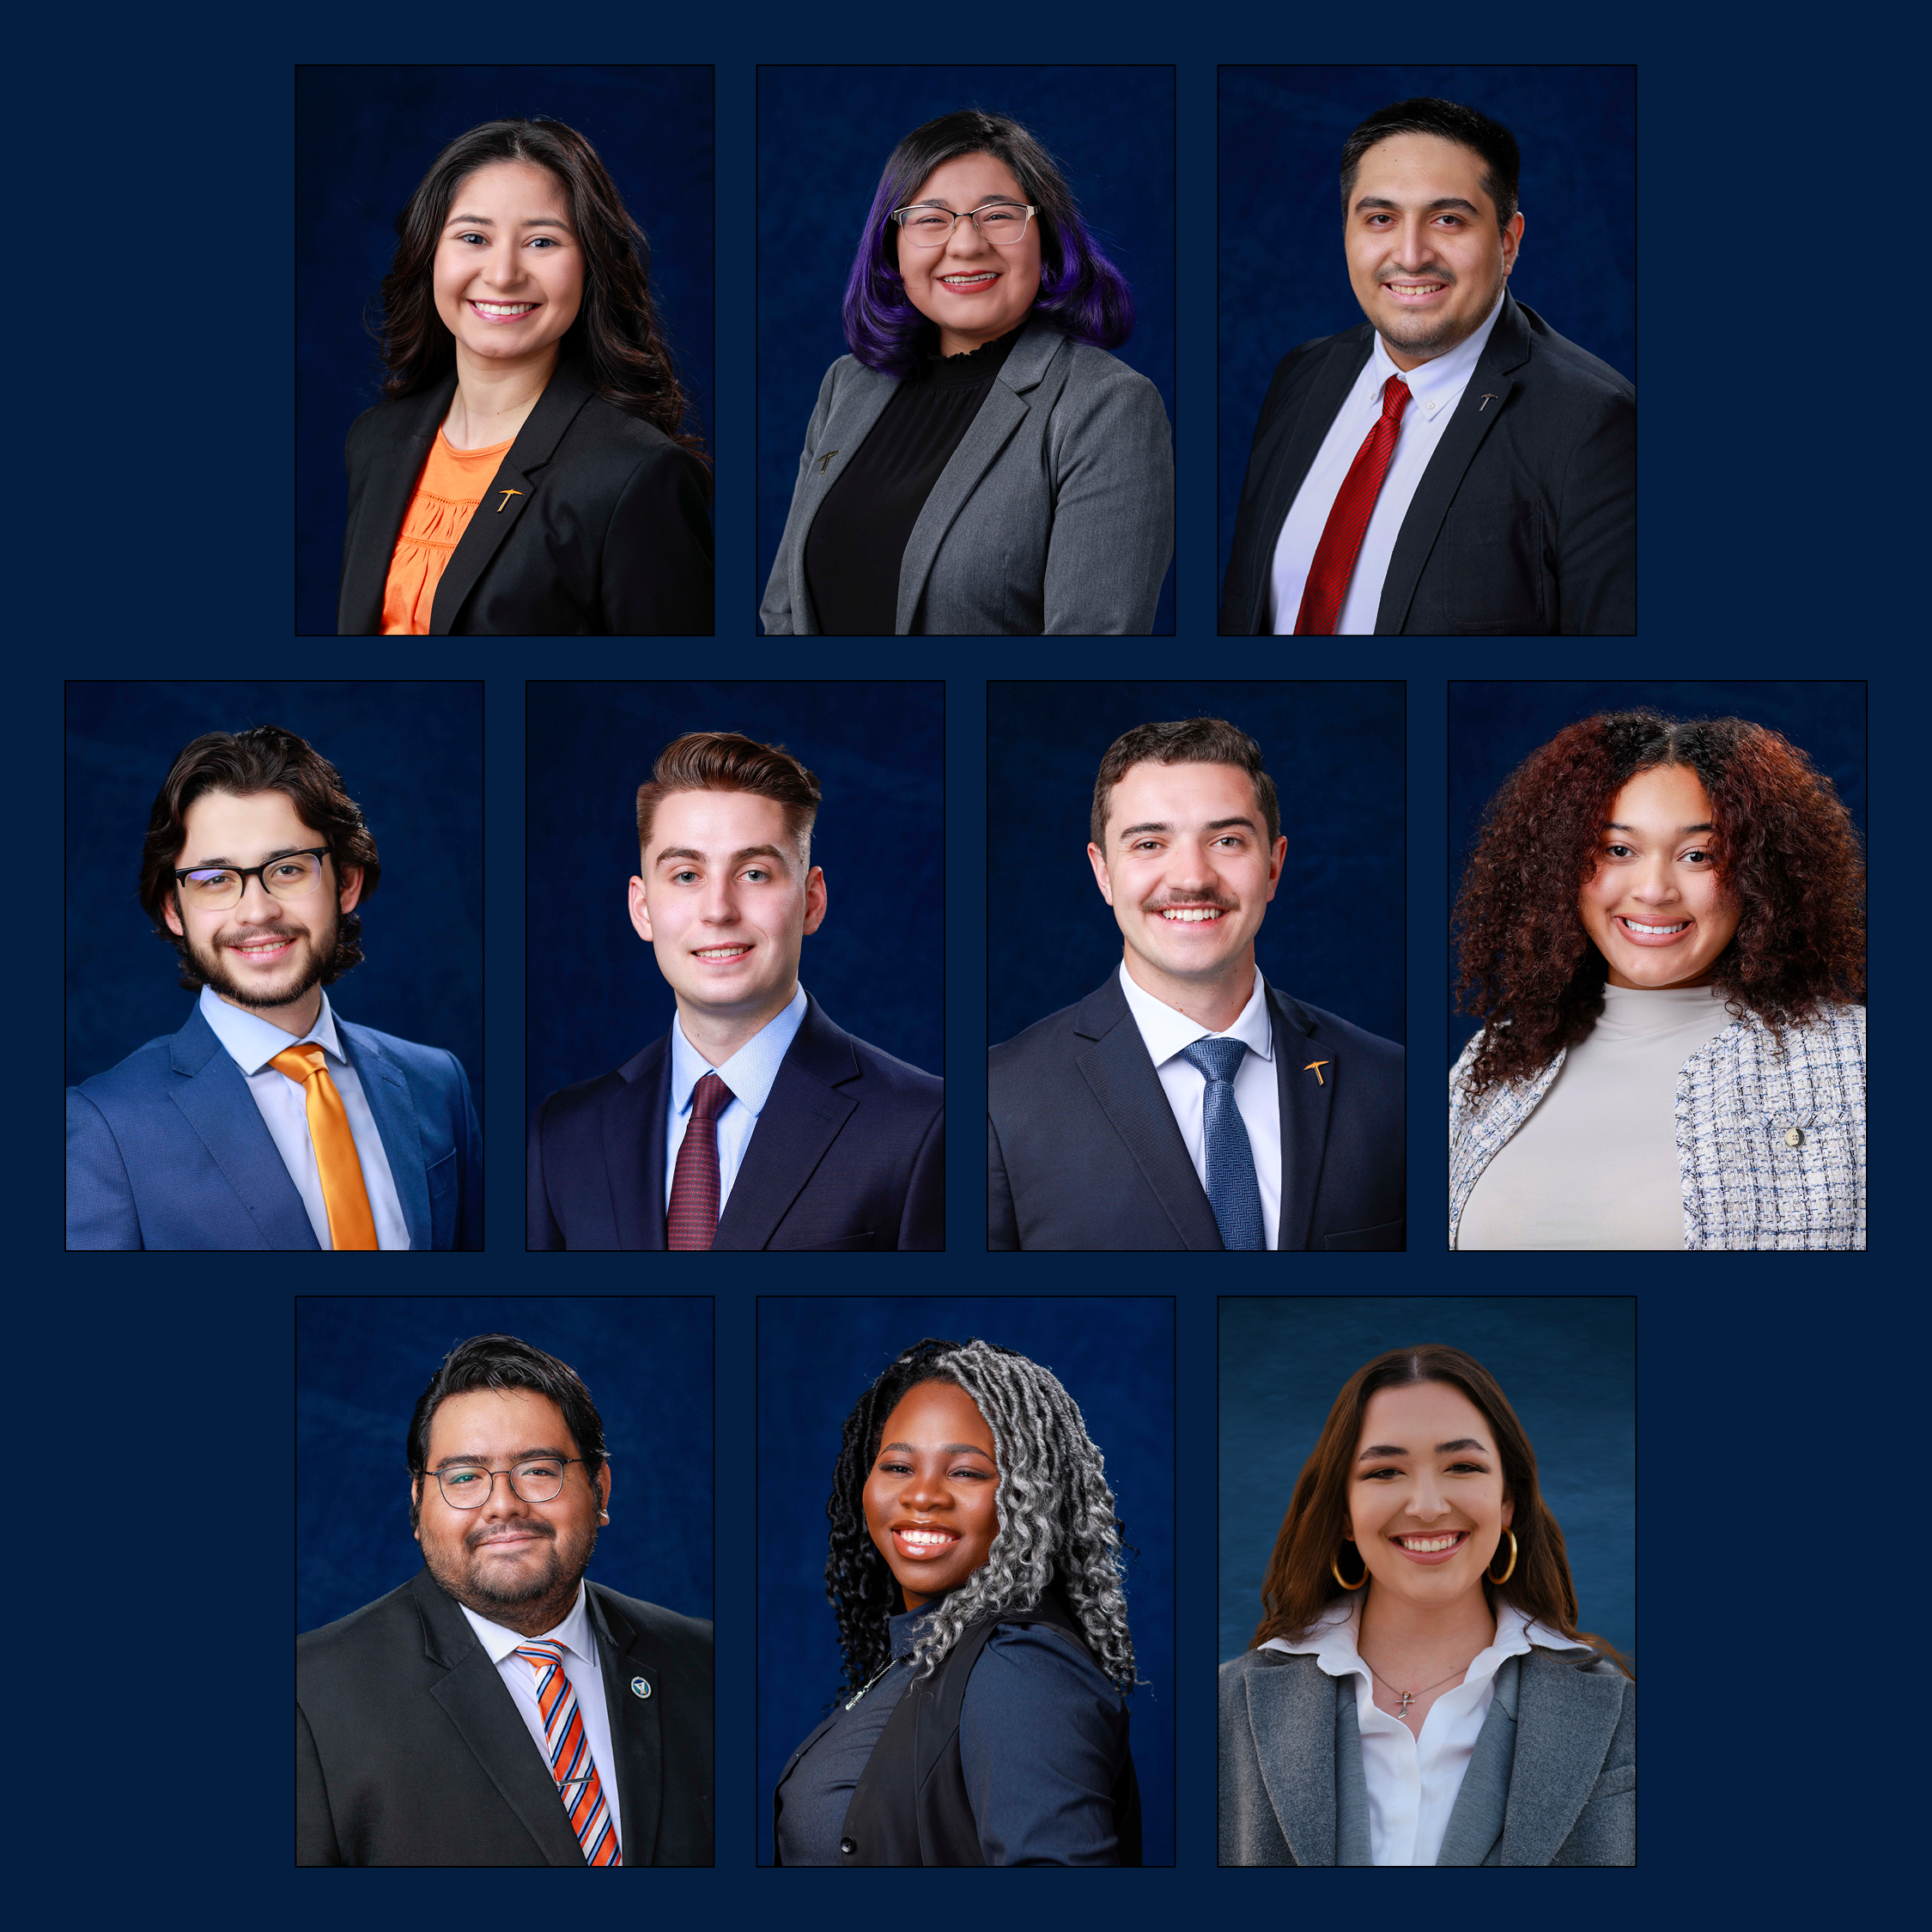 The Top Ten Seniors Awards are presented annually by The 山ּ of Texas at El Paso Alumni Association to a group of outstanding future alumni. Top row from left: Kennedy Trevino, Frida Garcia-Ledezma and Brian Rodiles Delgado. Middle row from left: Zachary Althoff, Benjamin Shipkey, Maximilian Rothblatt and Amira Williams. Bottom row from left: Michael Gutierrez, Abeni Merriweather and Zoe Andritsos.  